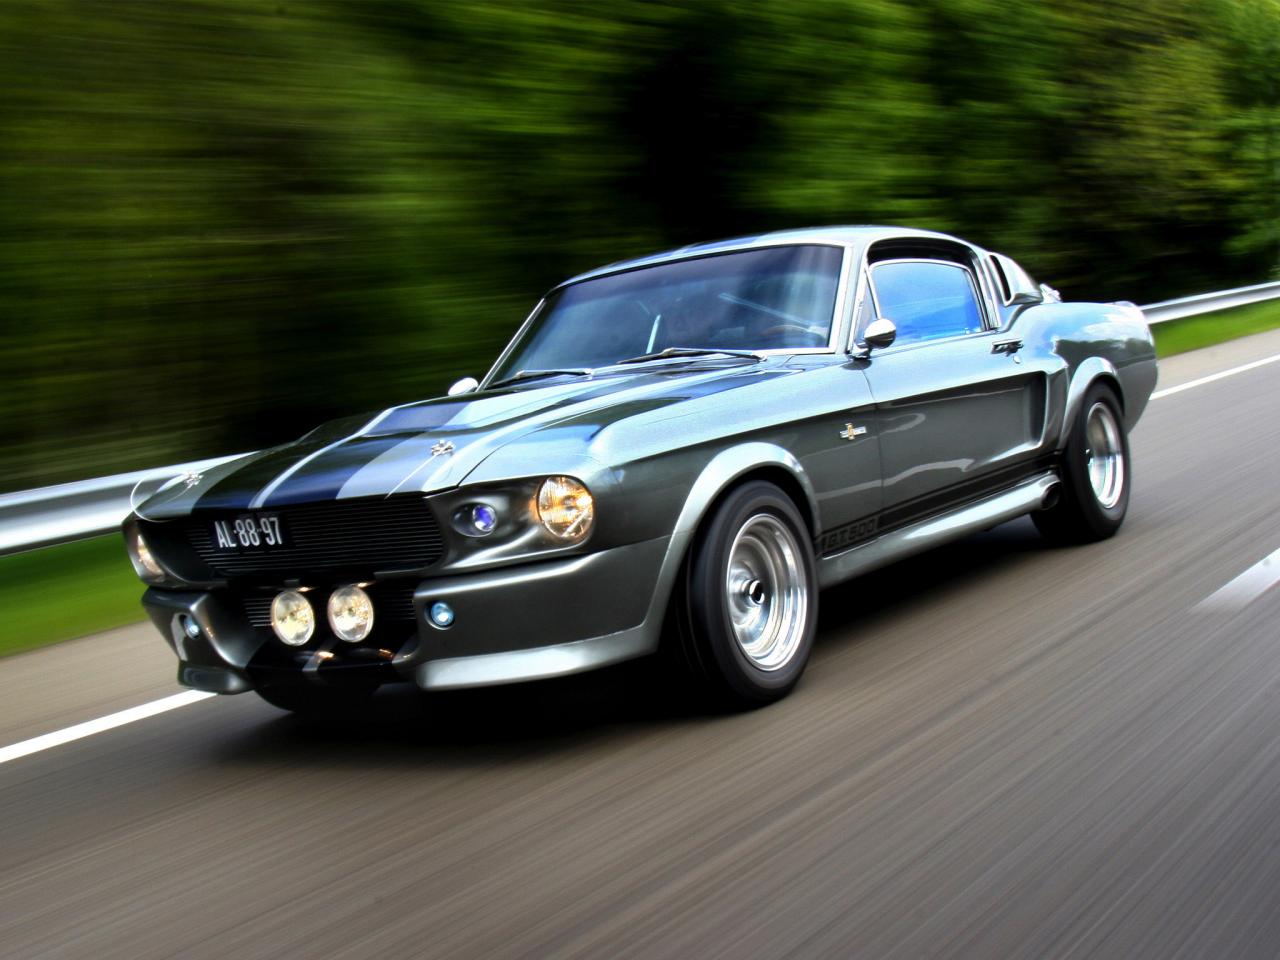 Car in pictures car photo gallery » Shelby Ford Mustang GT500 Eleanor